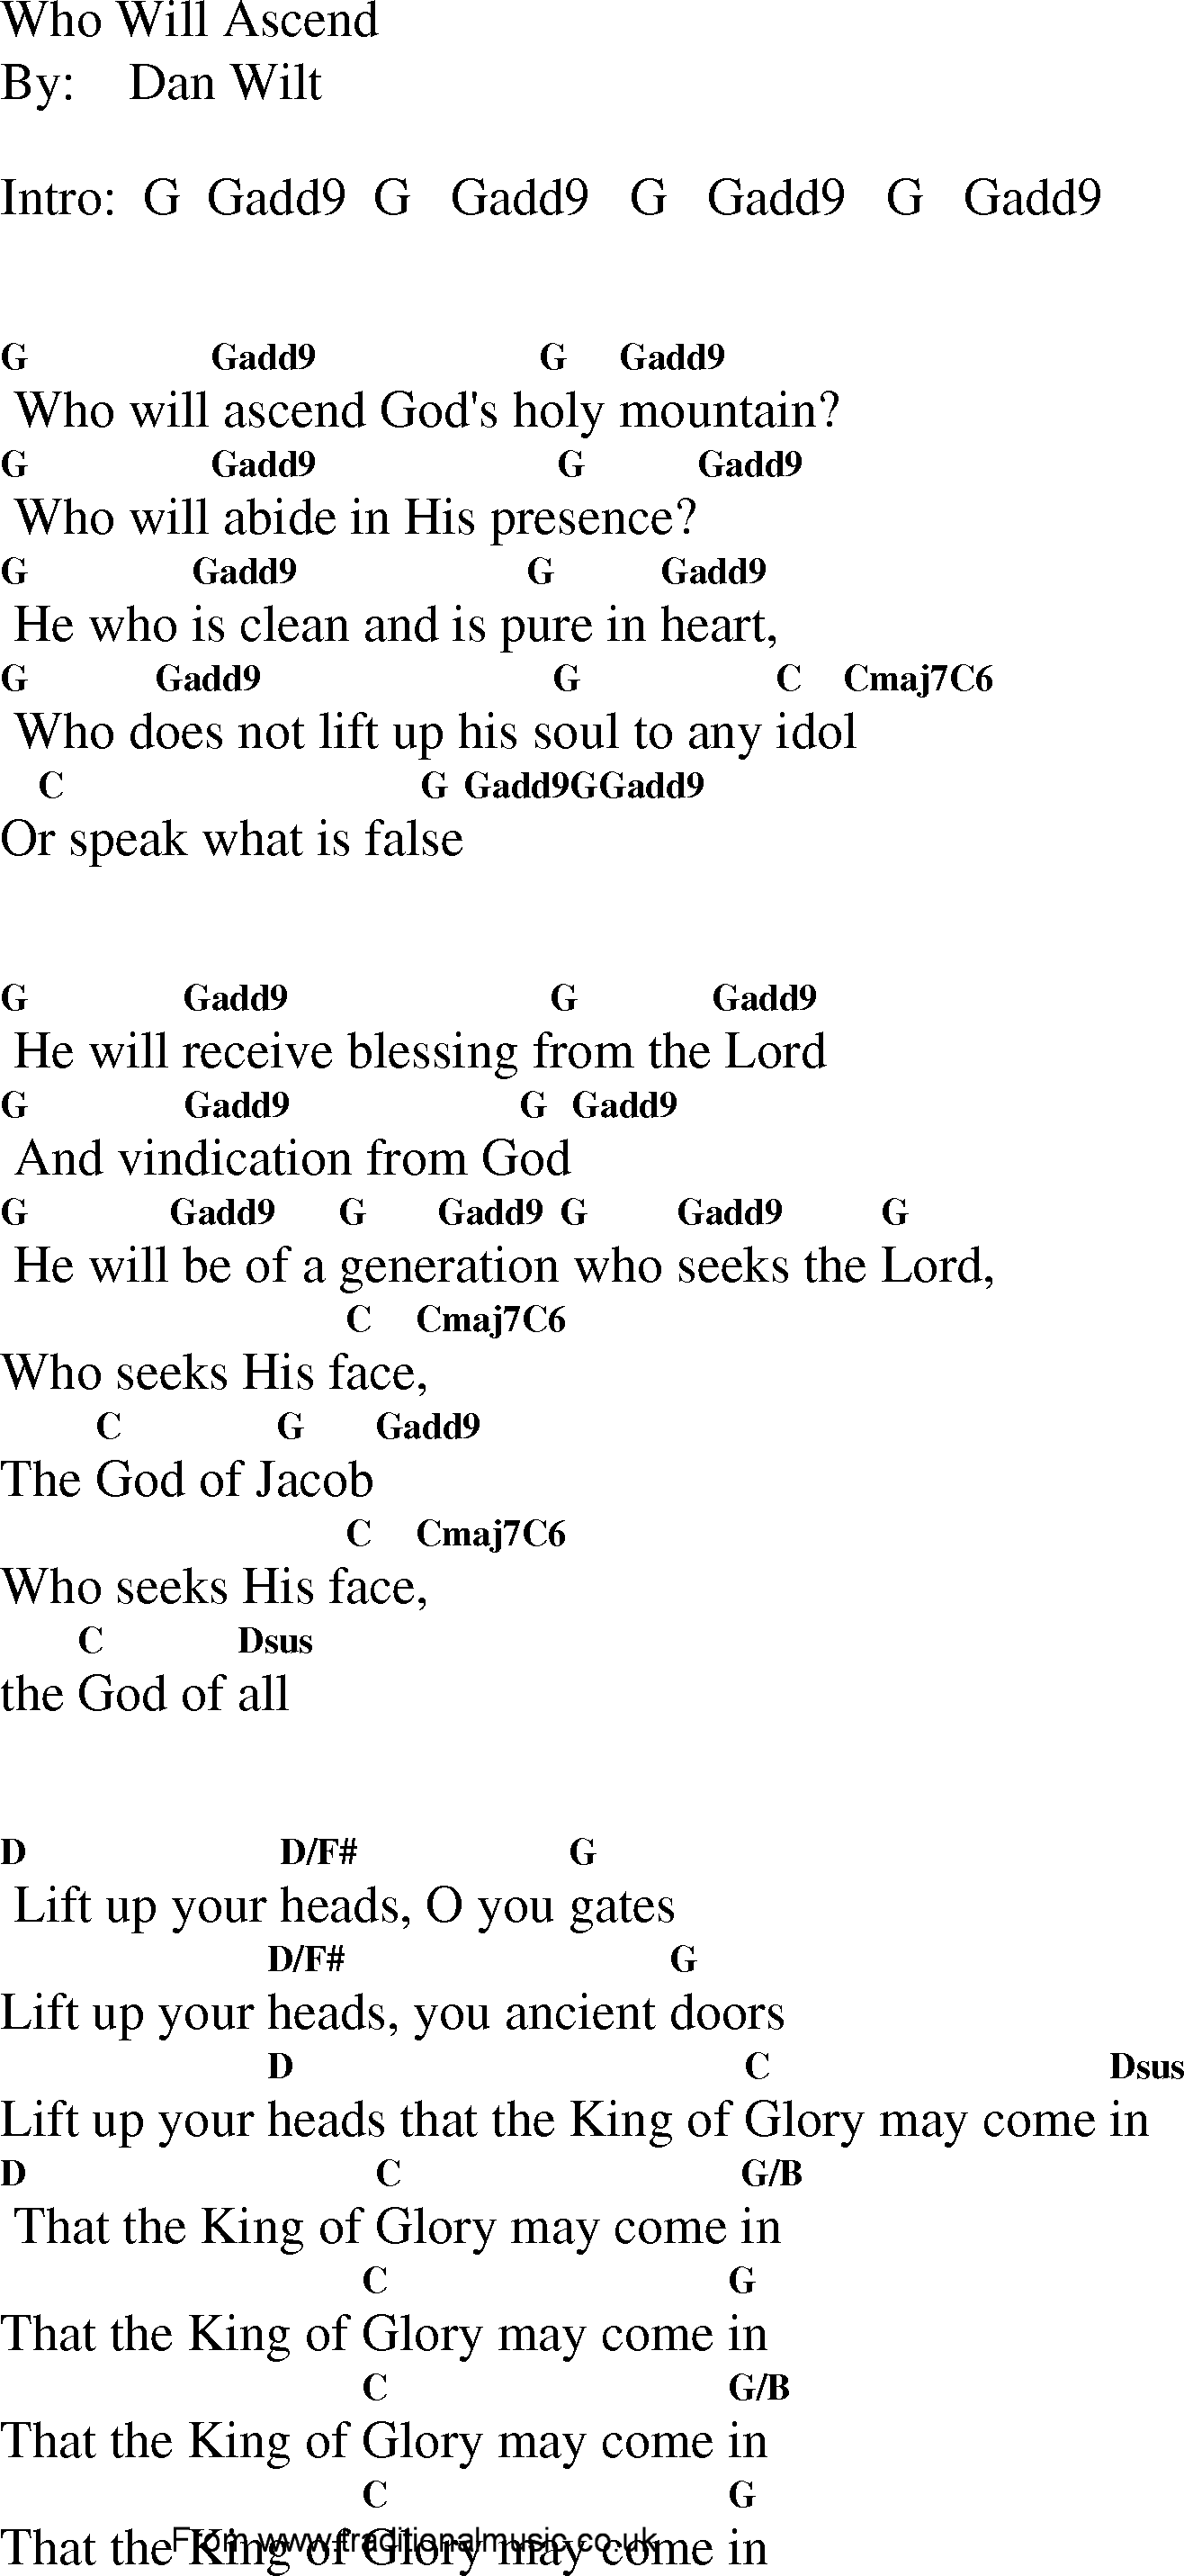 Gospel Song: who_will_ascend, lyrics and chords.